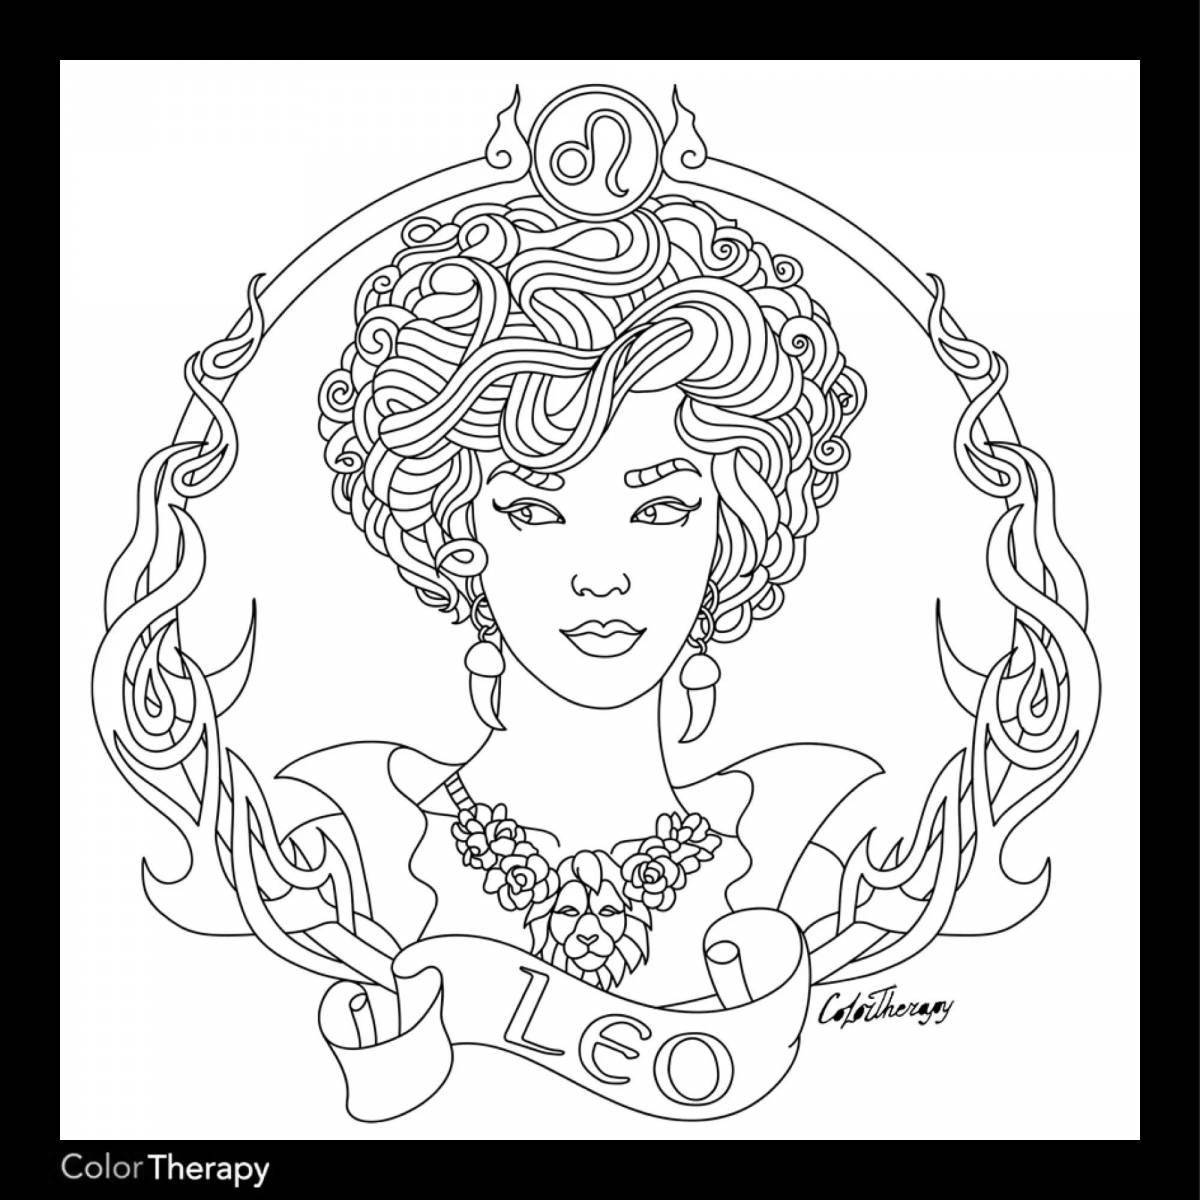 Fascinating coloring book anti-stress signs of the zodiac